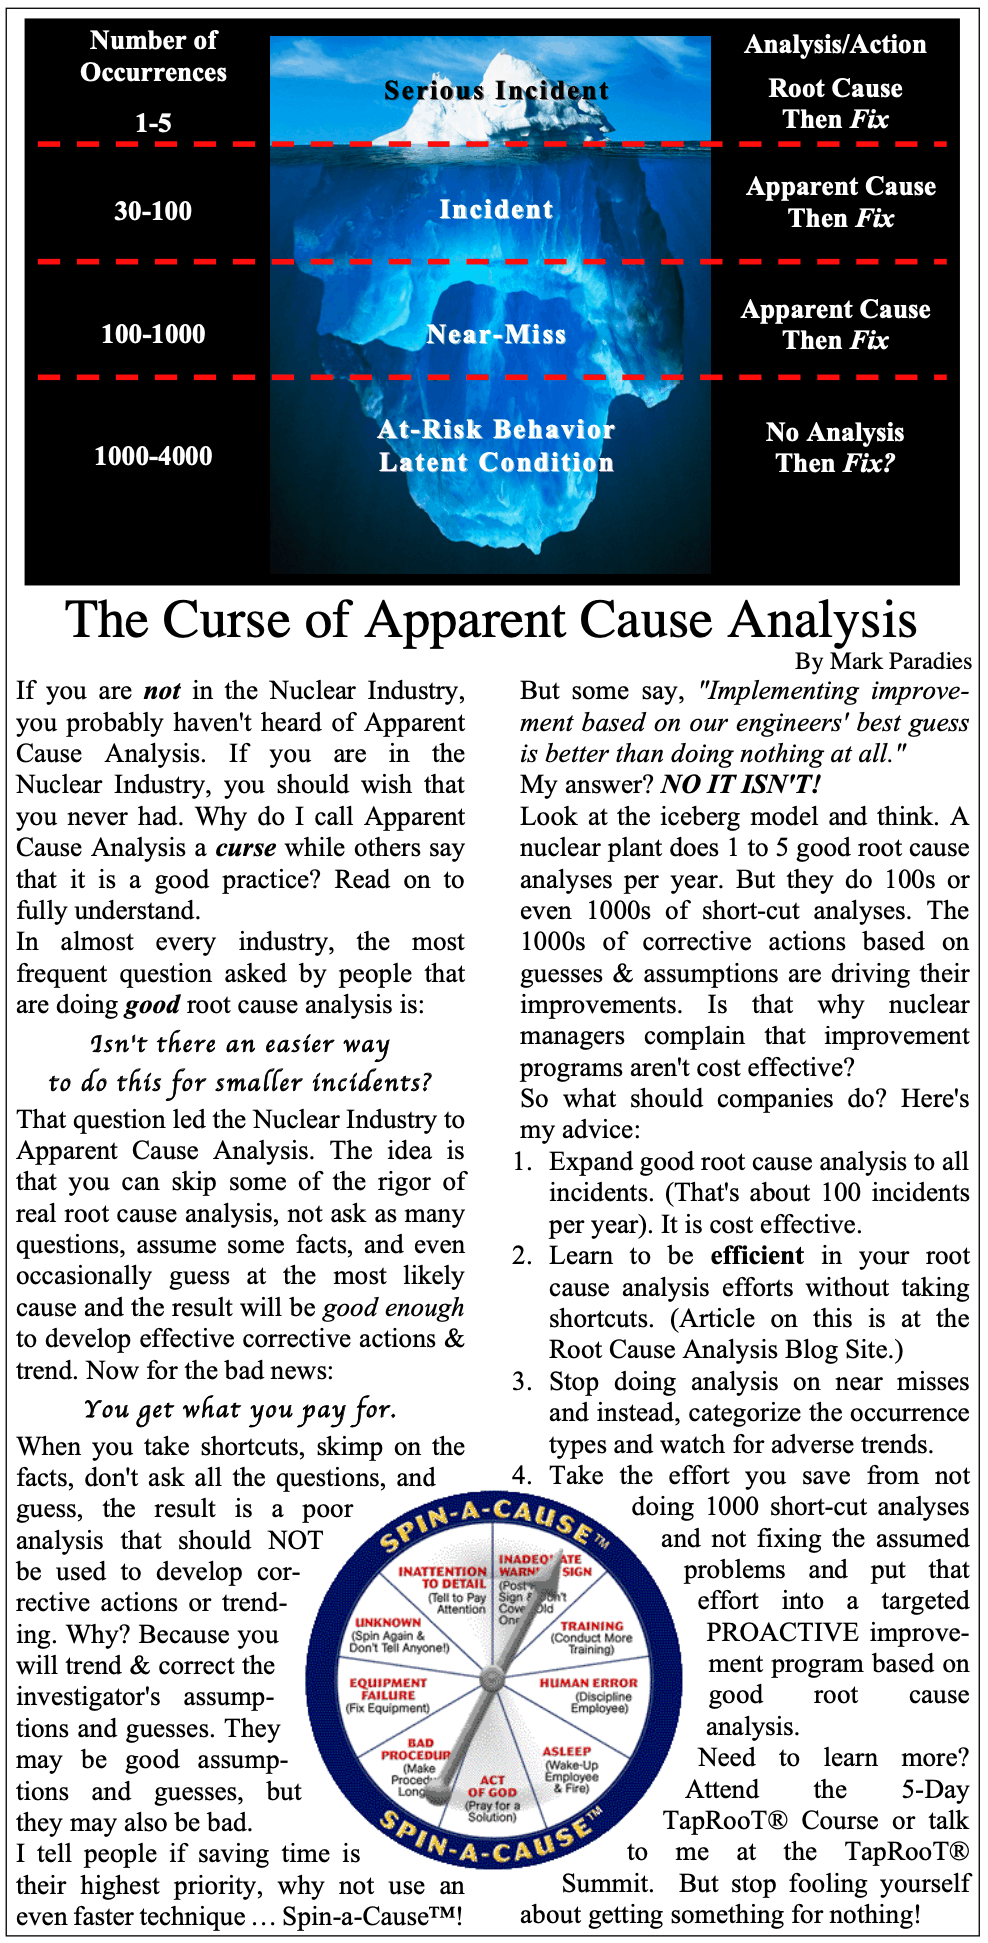 The Curse of Apparent Cause Analysis